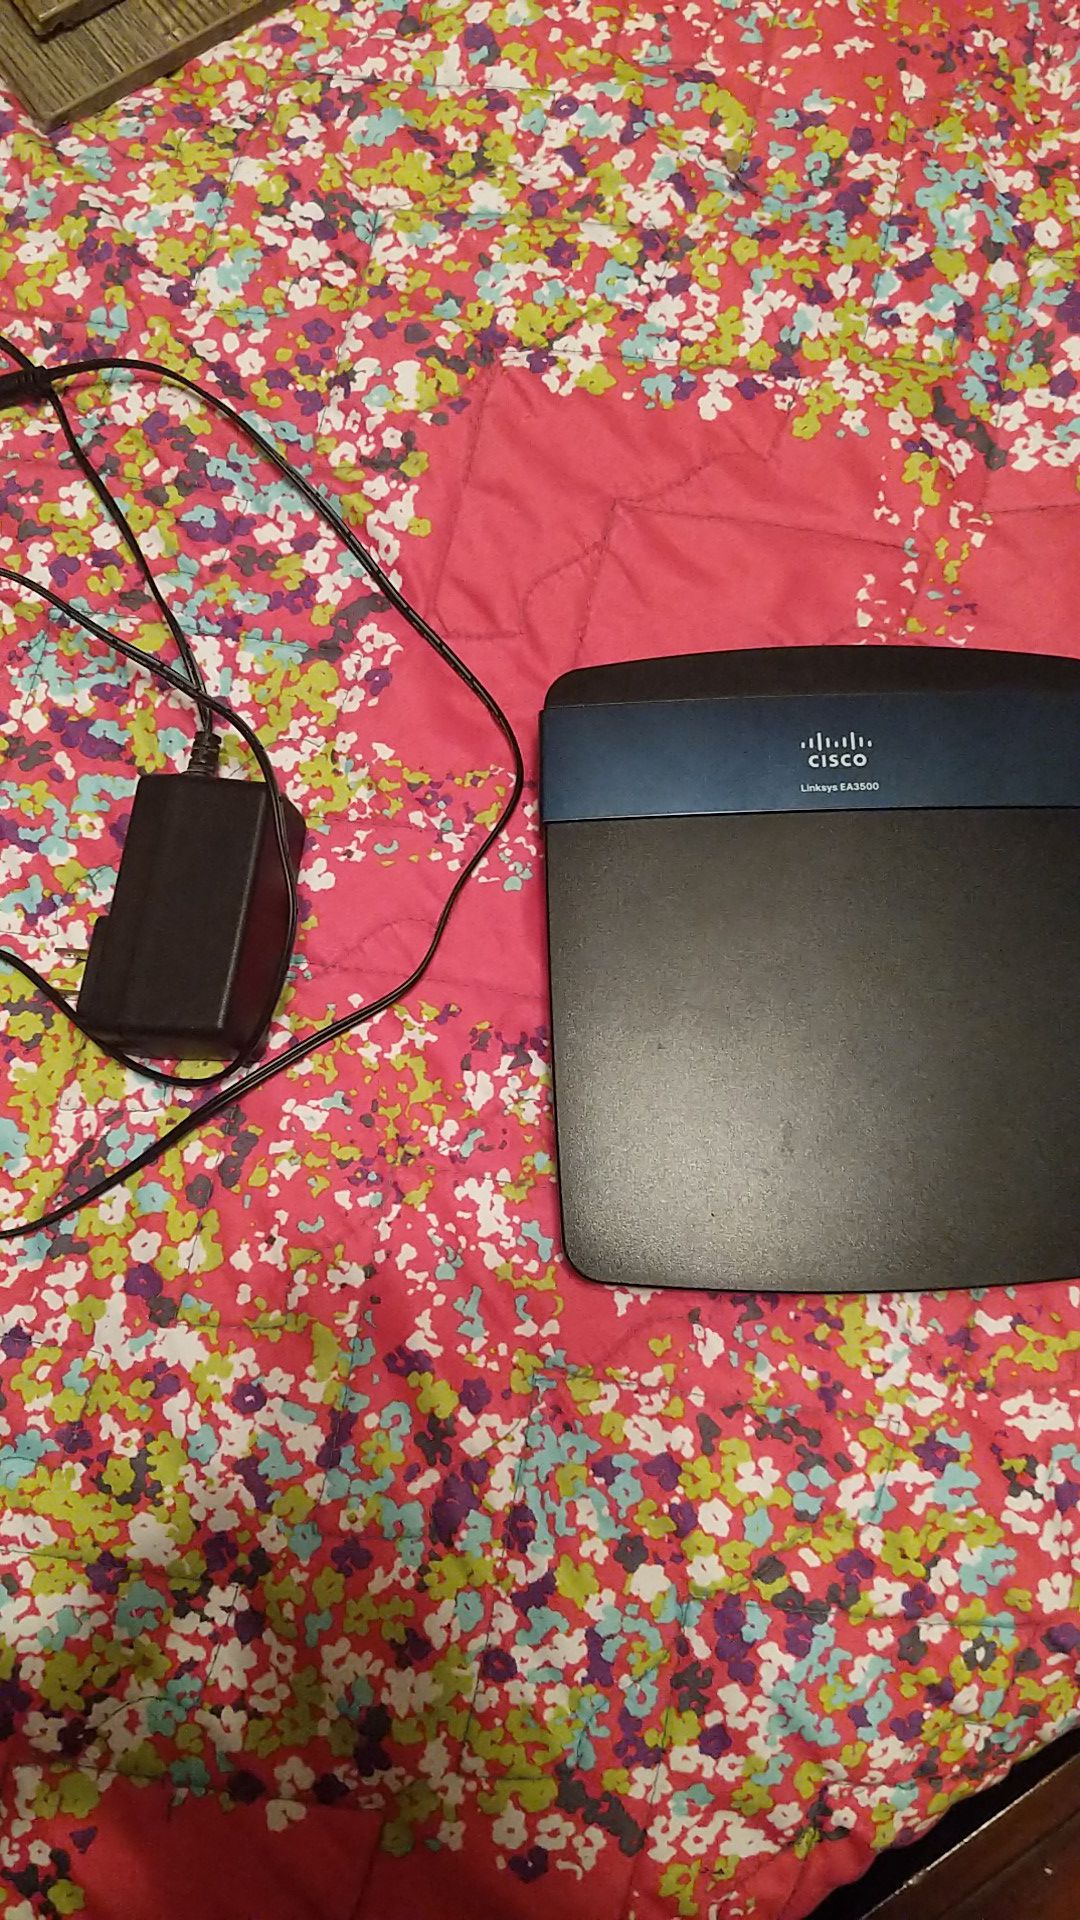 Linksys dual band router